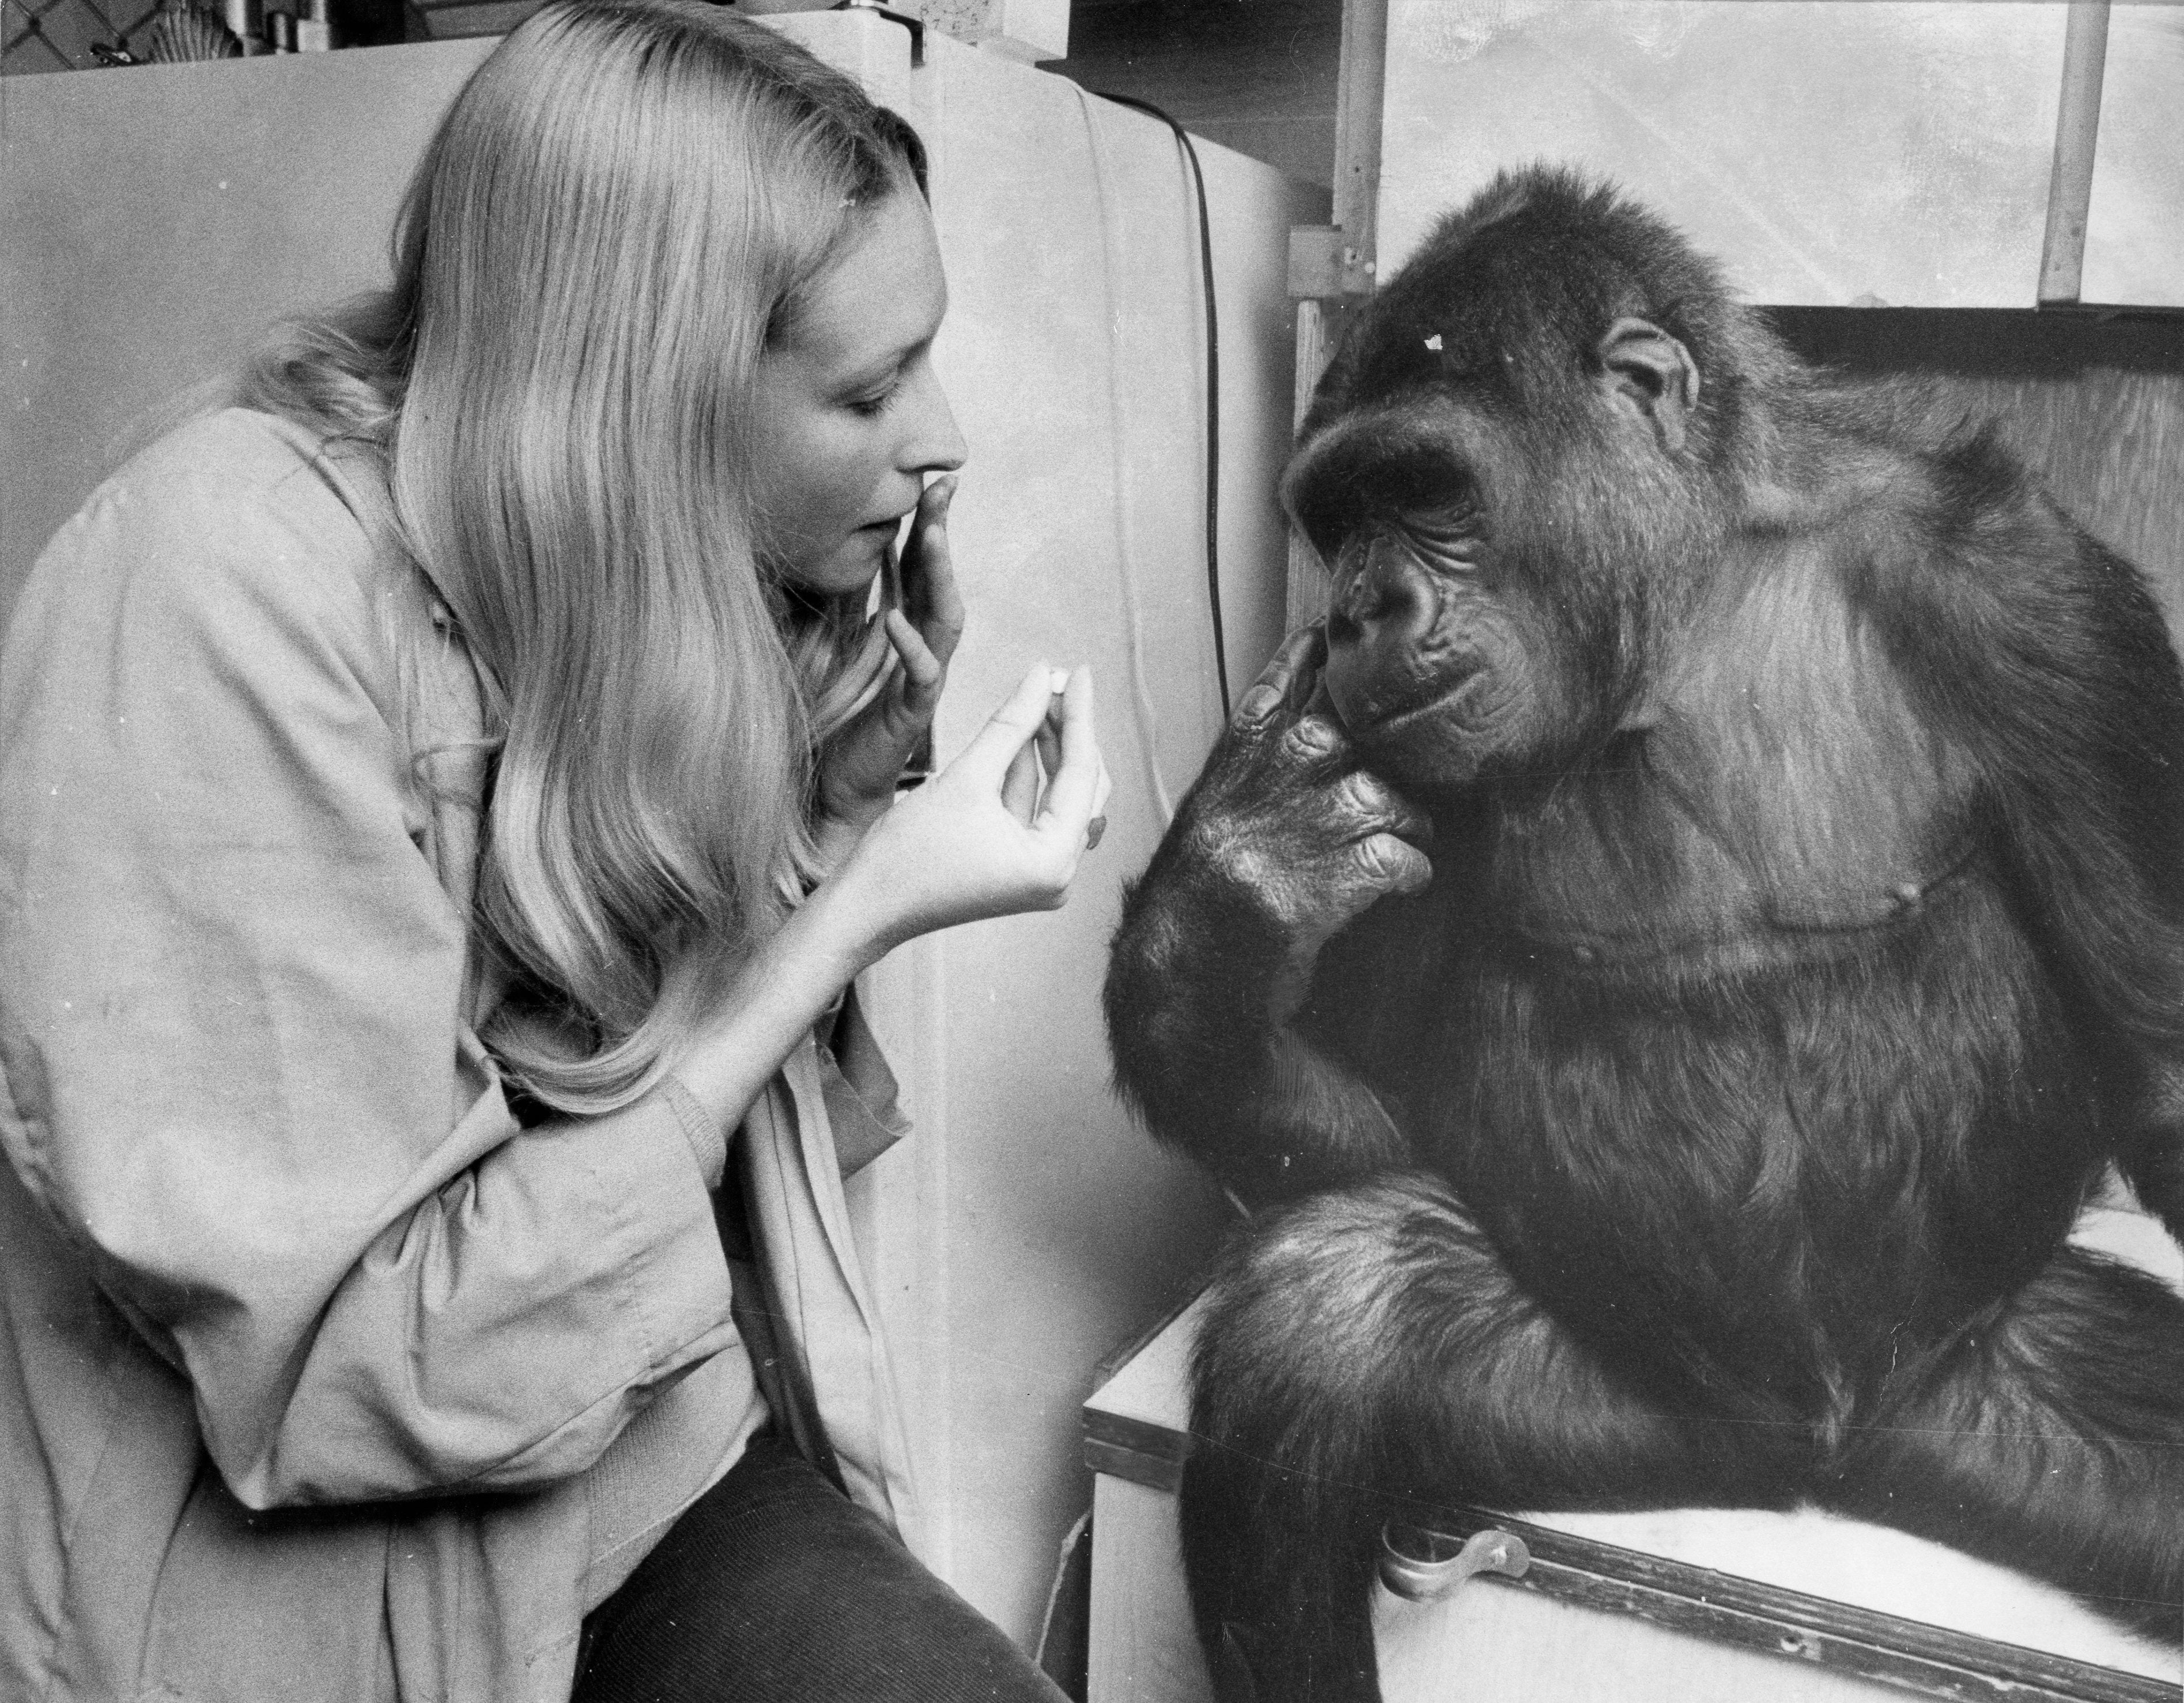 Talking to the animals: Patterson teaching Koko how to sign